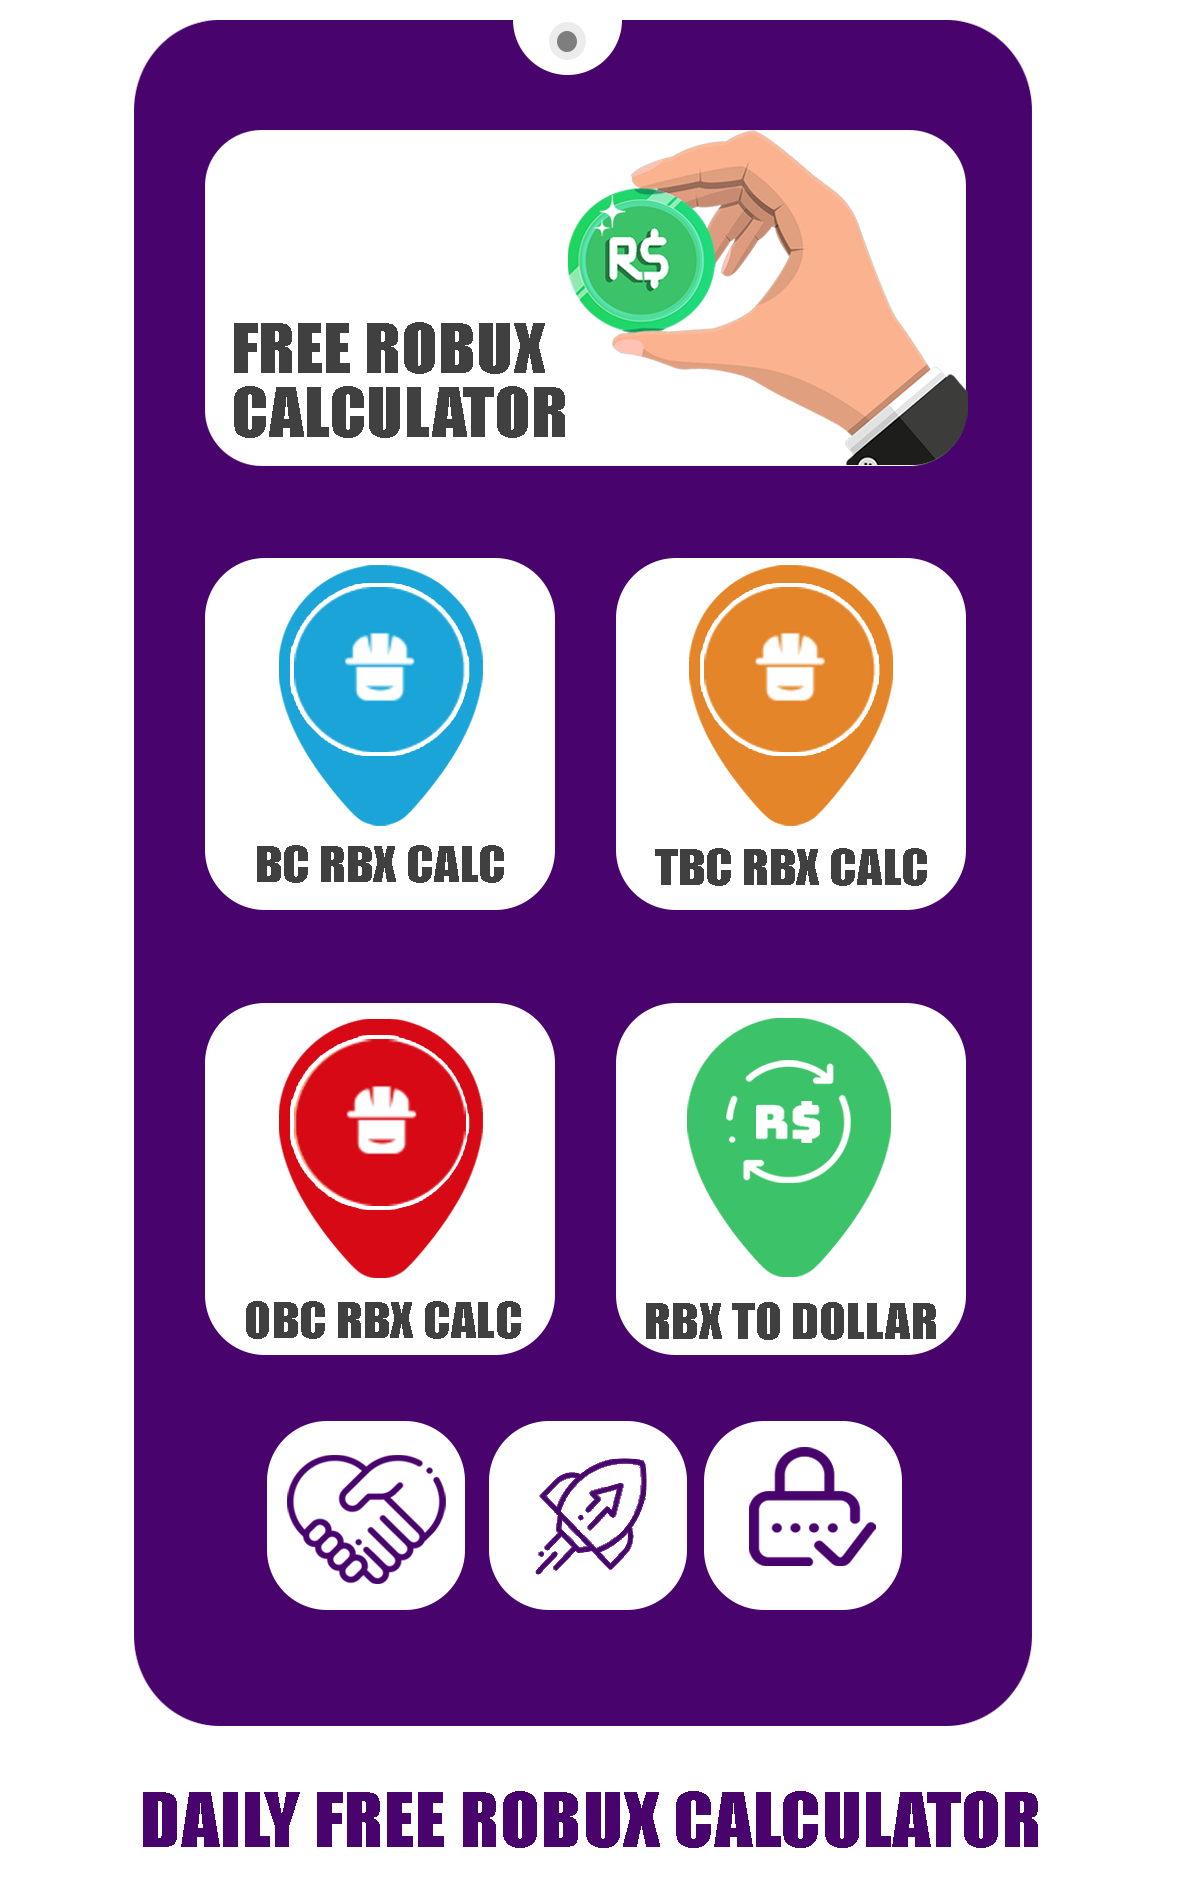 Free Robux Calc For RBLOX - RBX Station for Android - APK ... - 